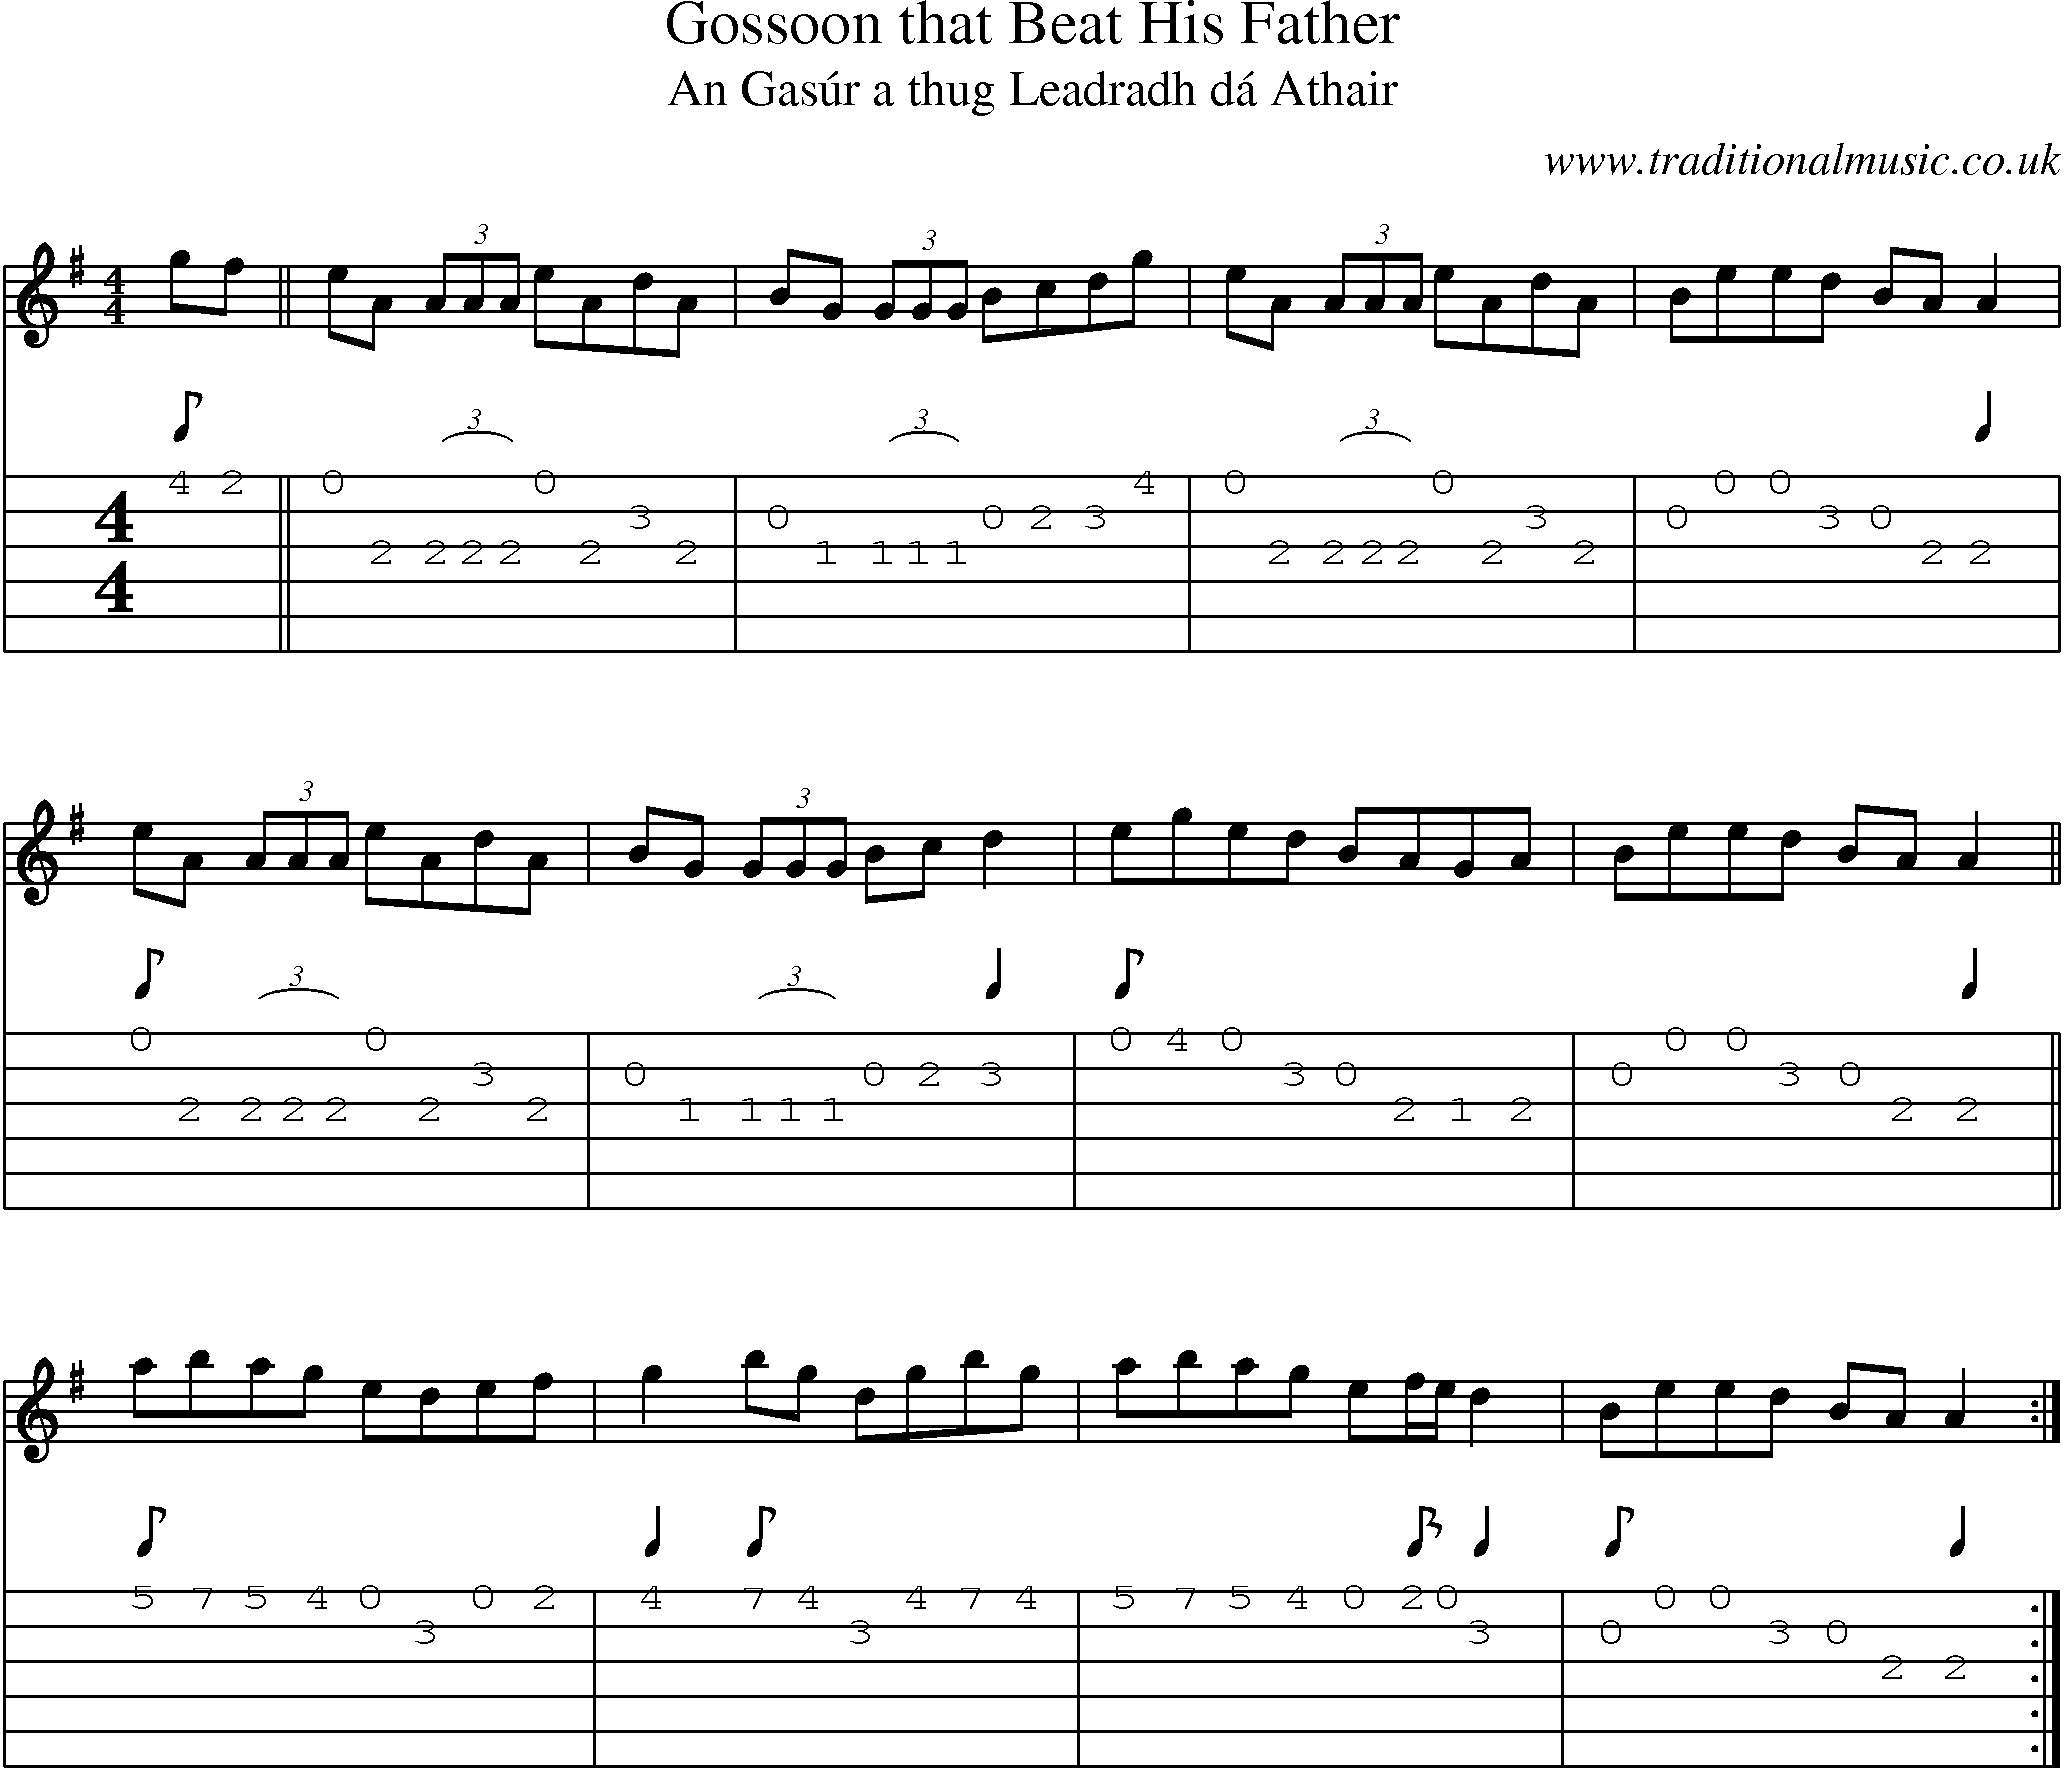 Music Score and Guitar Tabs for Gossoon That Beat His Father